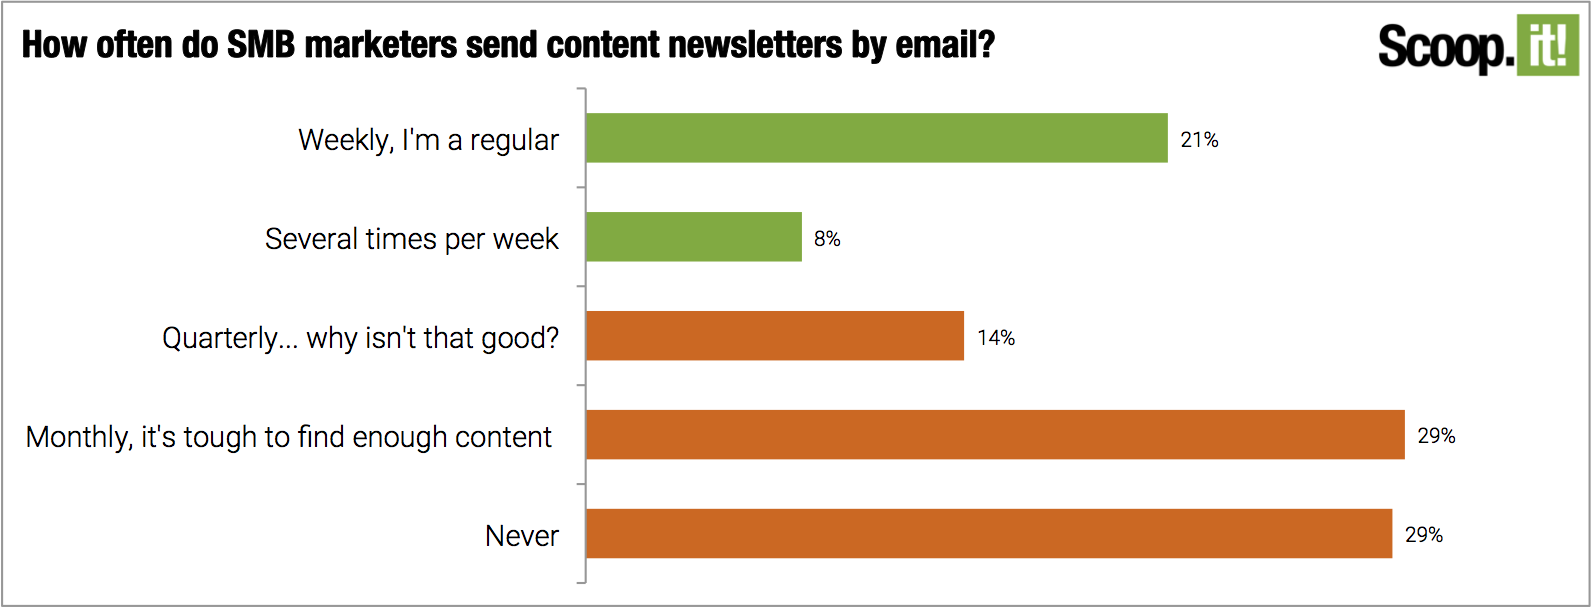 How-often-do-SMB-marketers-send-content-newsletters-by-email